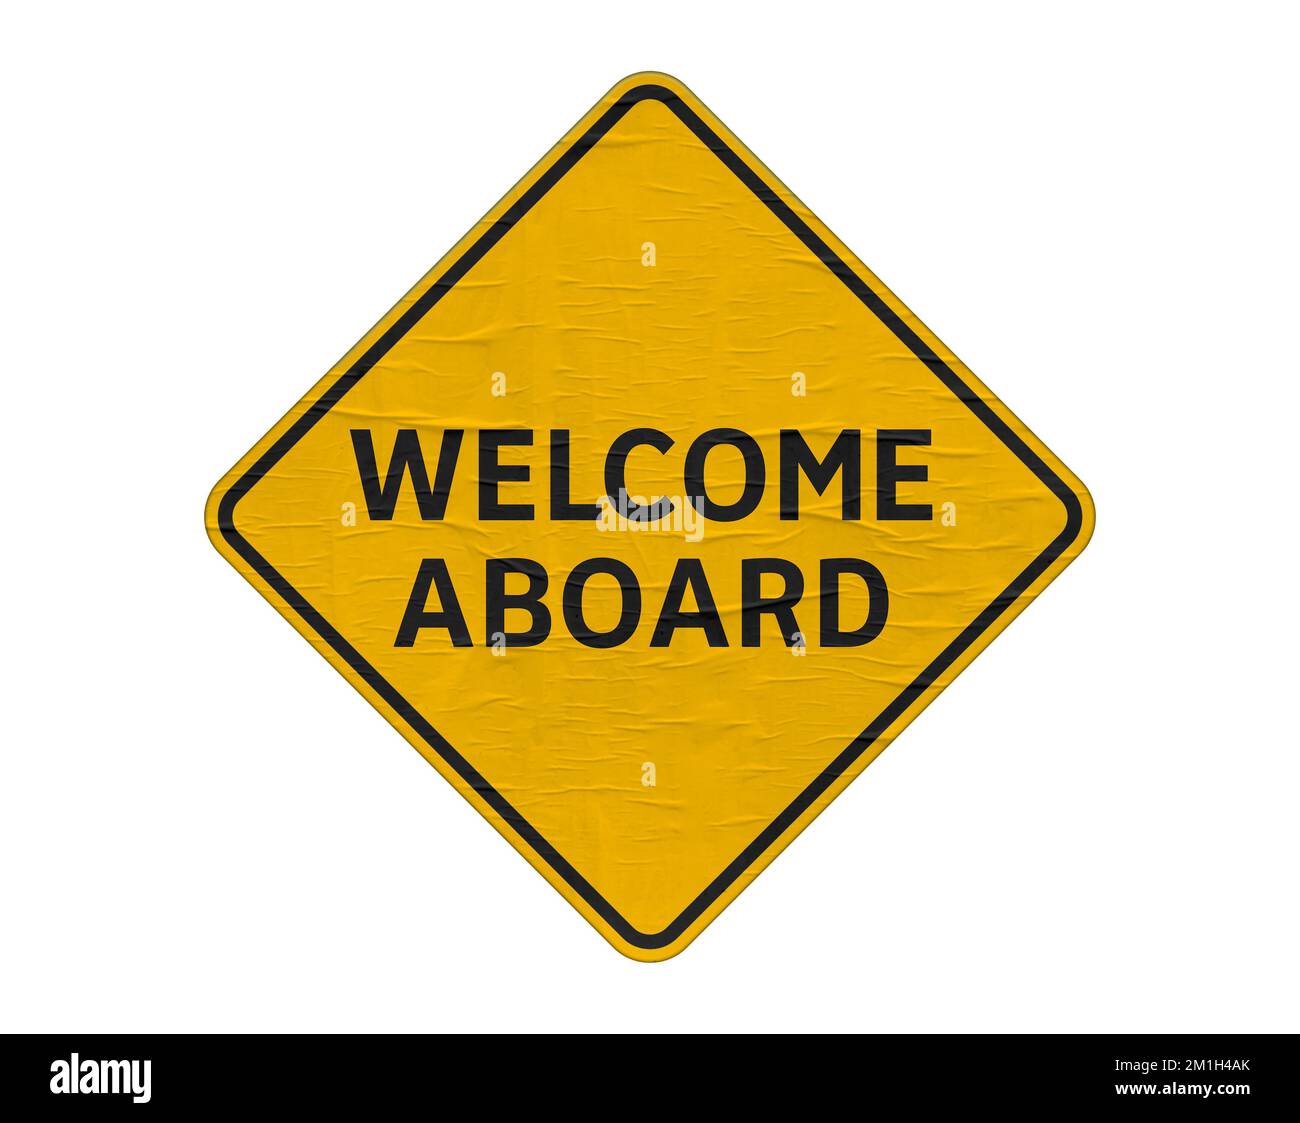 Welcome Aboard - yellow road sign Stock Photo